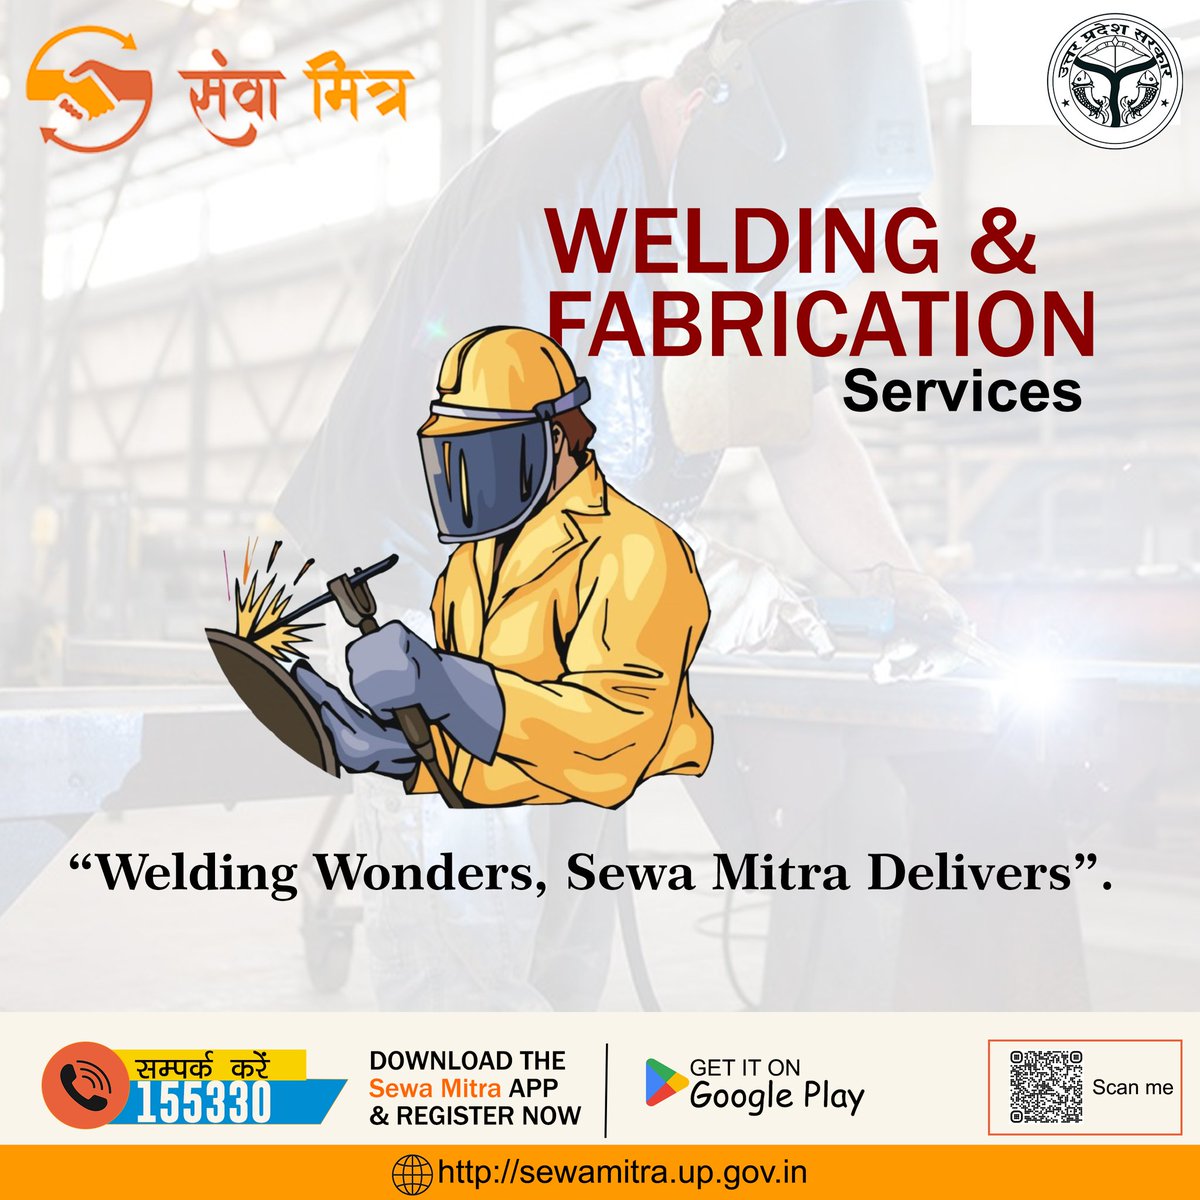 From sparks to sleek creations, Sewa Mitra Welding and Fabrication Services transform metal into Marvel! 🛠️🔥

Call 155330 for more details! 🔧👨‍🏭

#welding #fabrication #metalworking #metalbending #customfabrication #custommetalwork #sewamitra #sewamitraservices #sewamitraportal